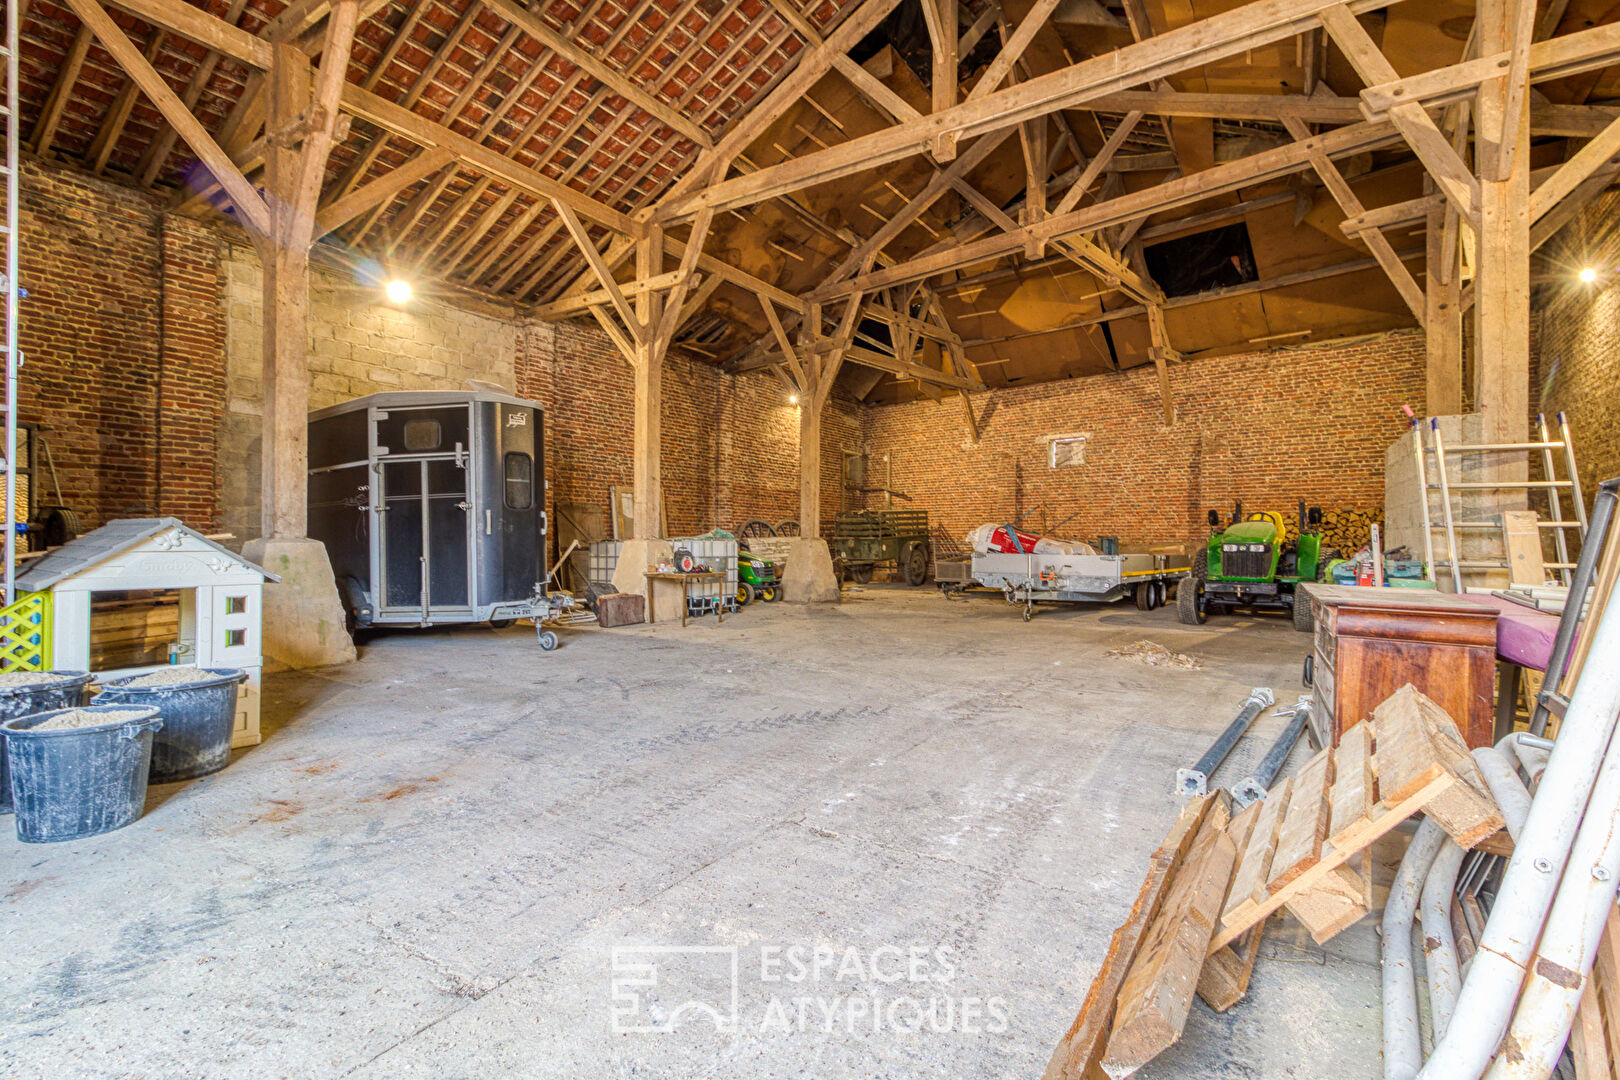 Completely renovated square farm and its numerous outbuildings, pasture and box